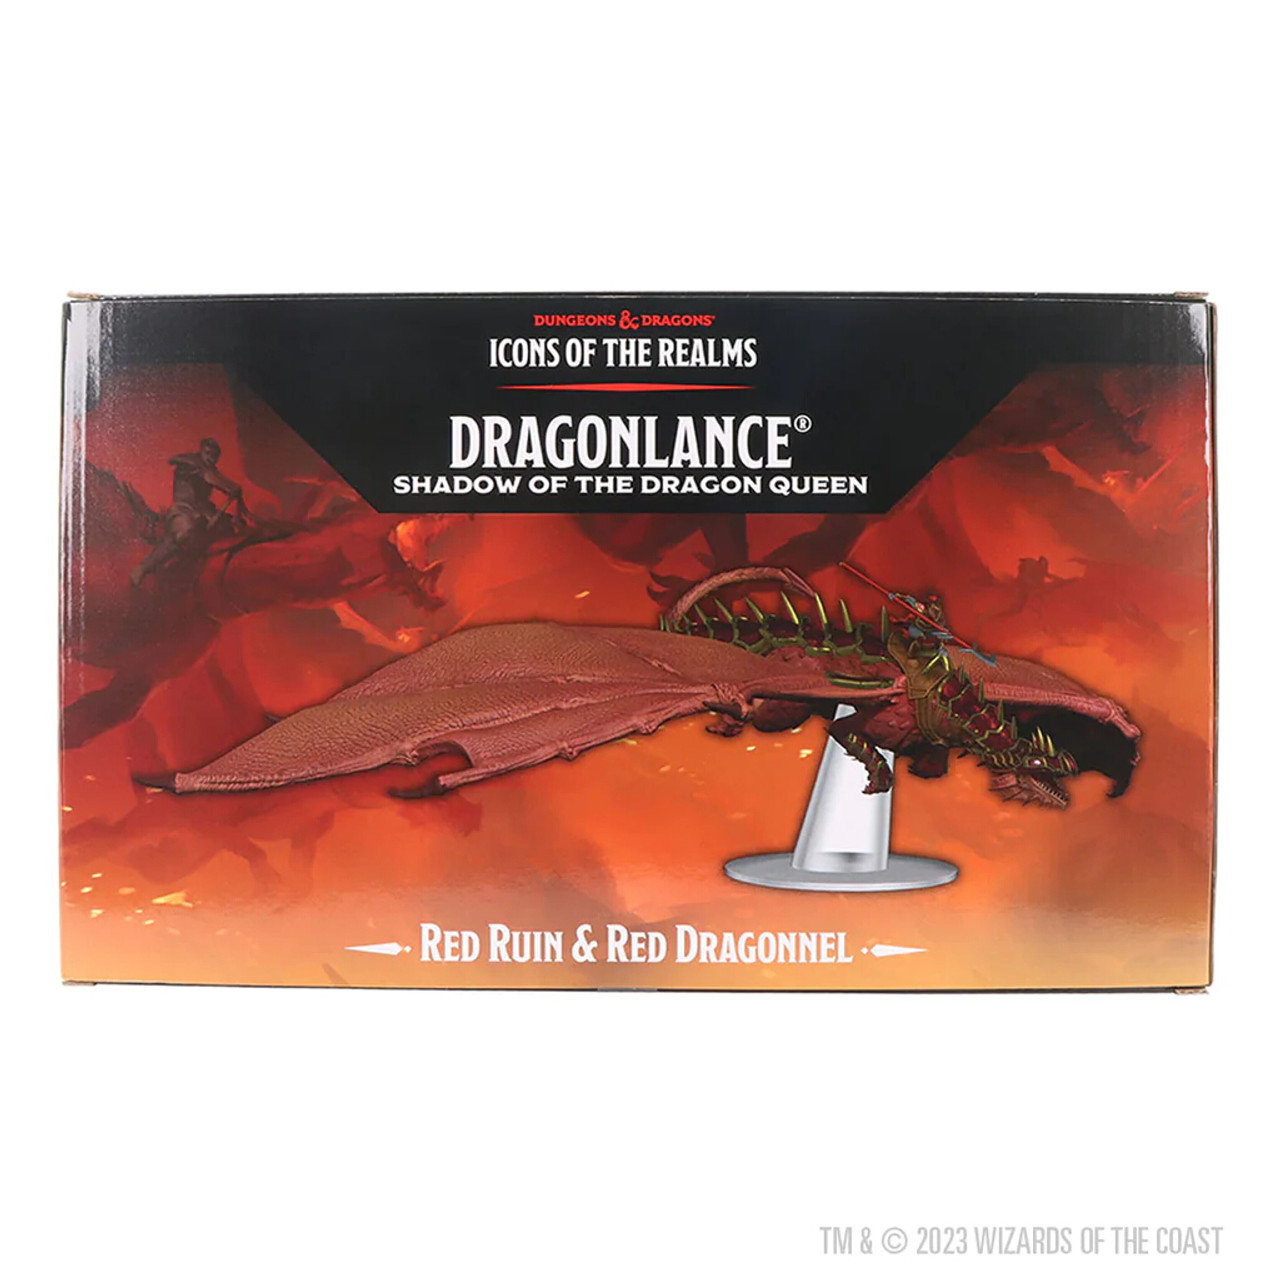 Red Ruin & Dragonnel Premium Set - Dragonlance: Shadow of the Dragon Queen D&D 